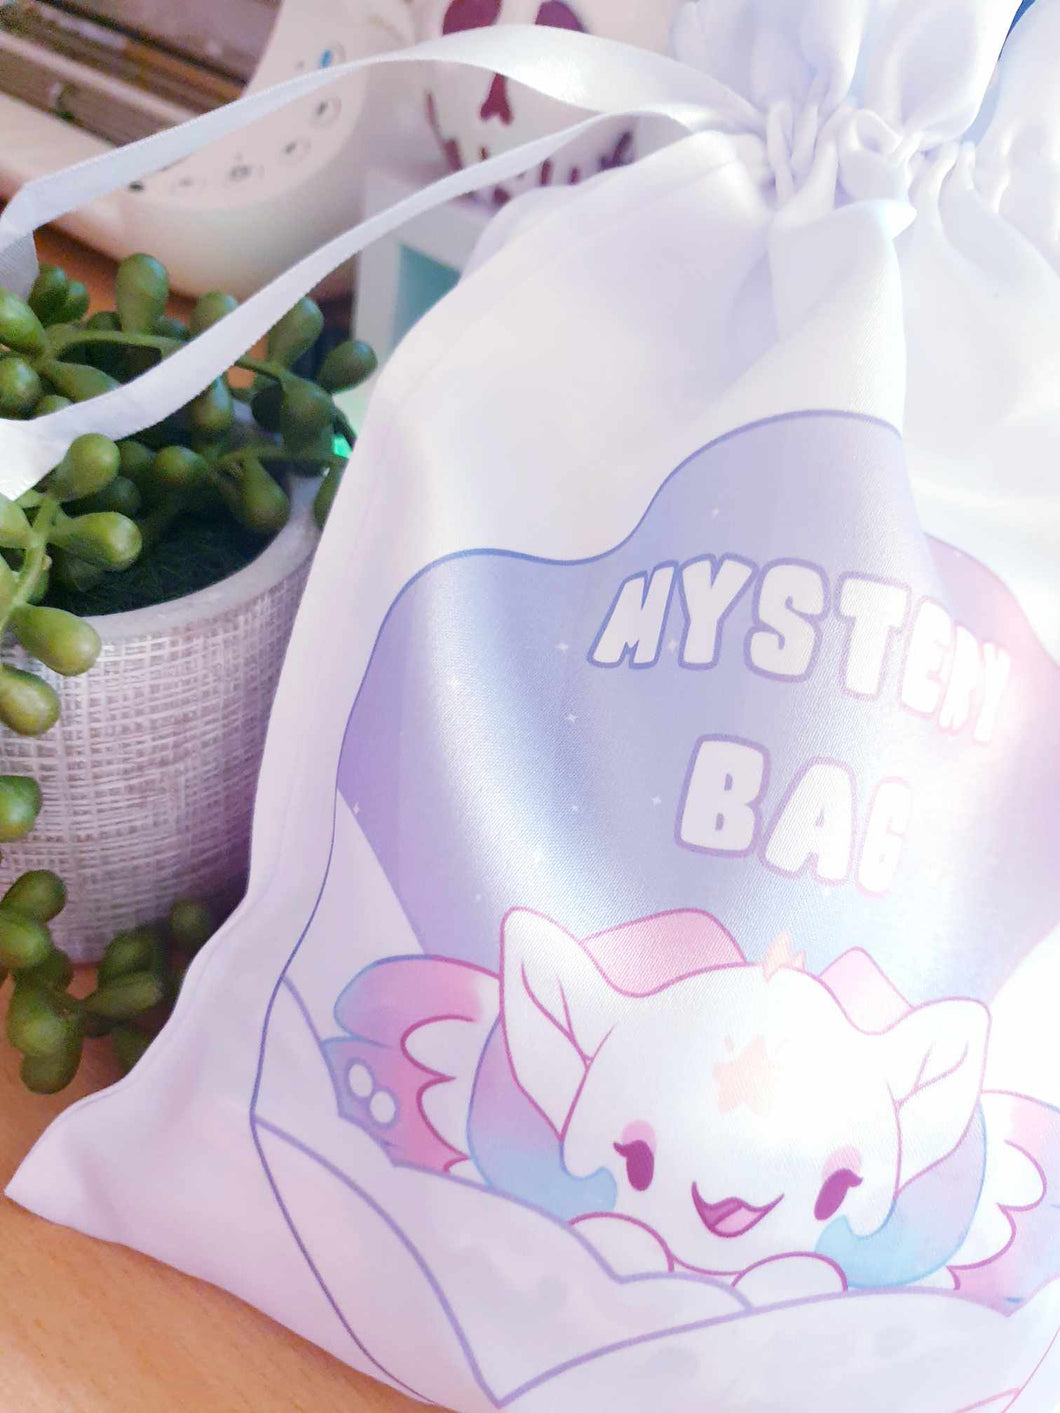 Large Mystery Bag